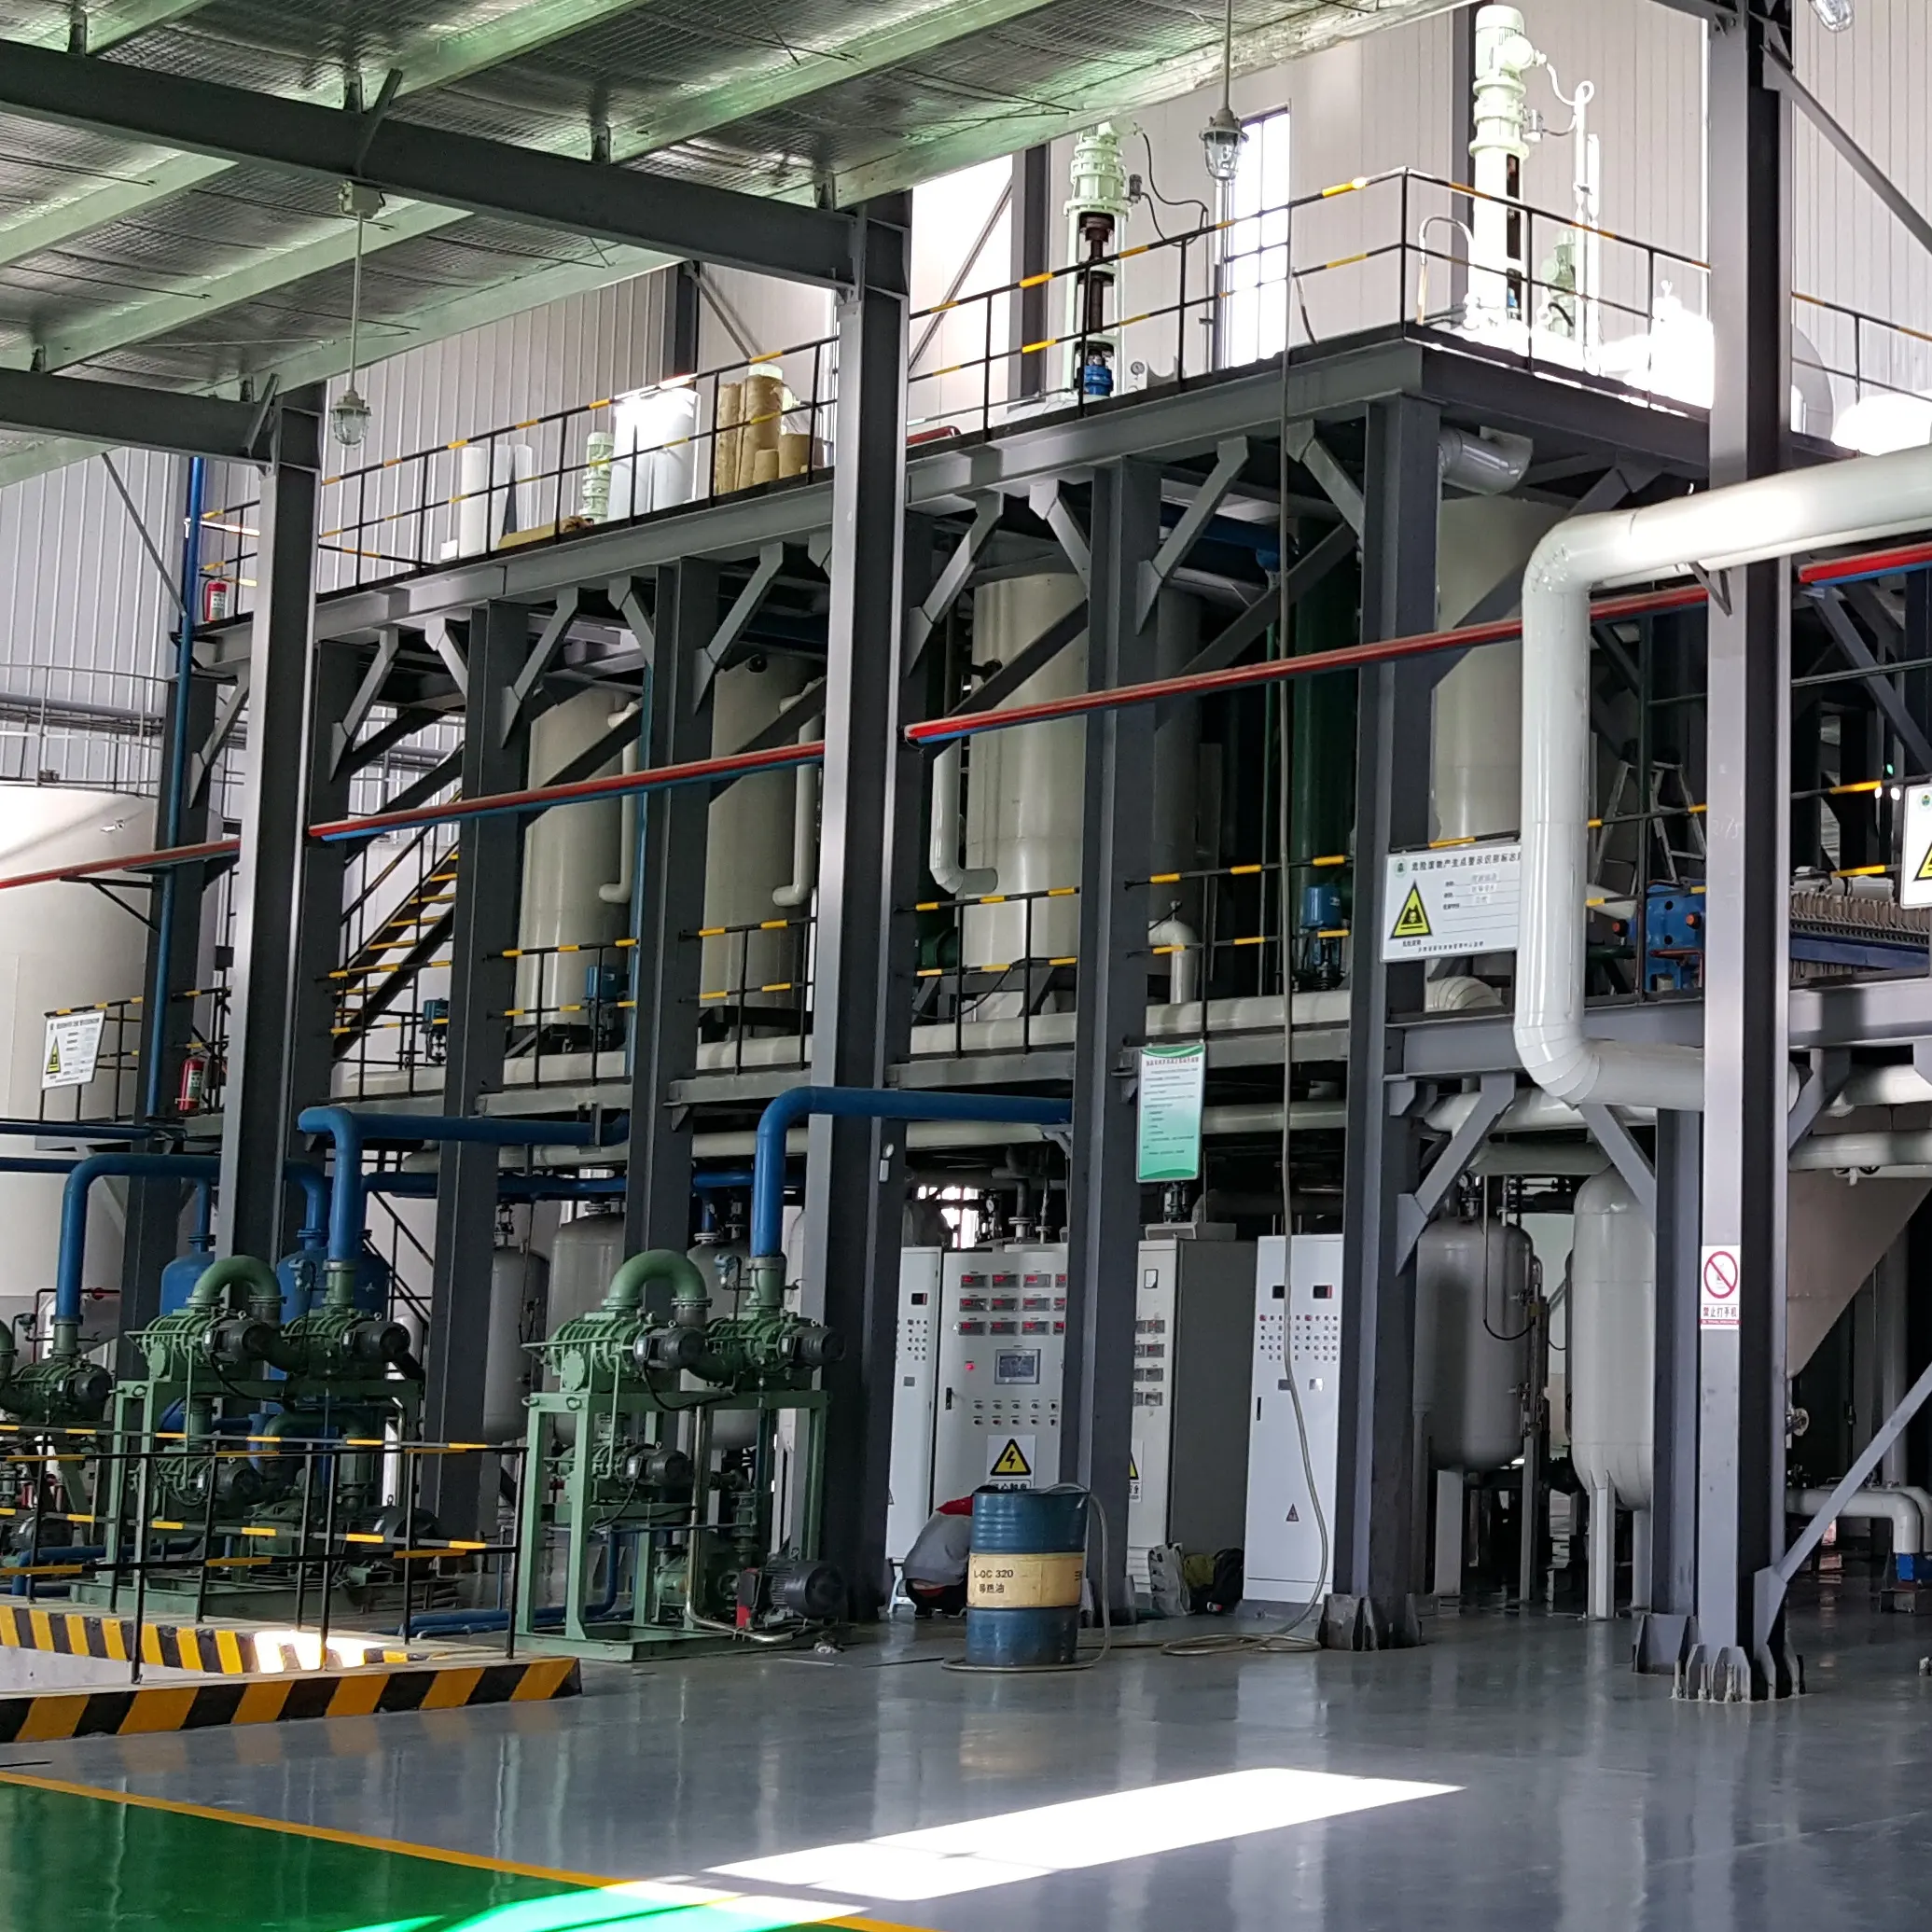 The used oil and waste mineral oil recycling equipment